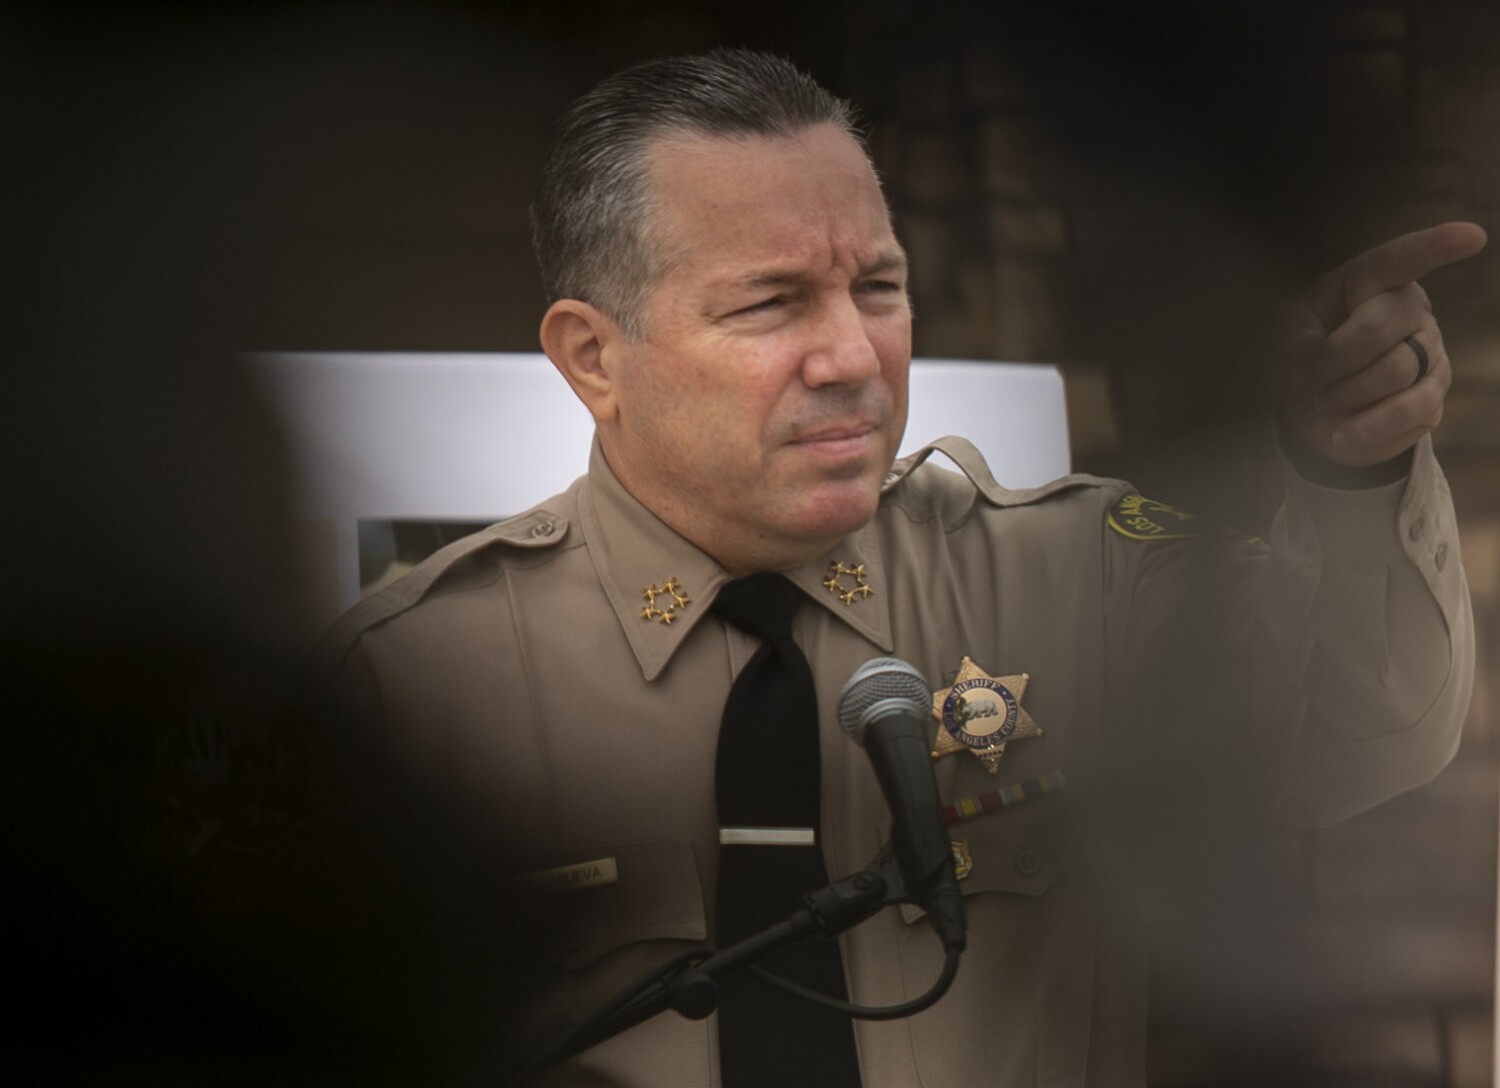 Third top official disputes Sheriff Villanueva's account in cover-up